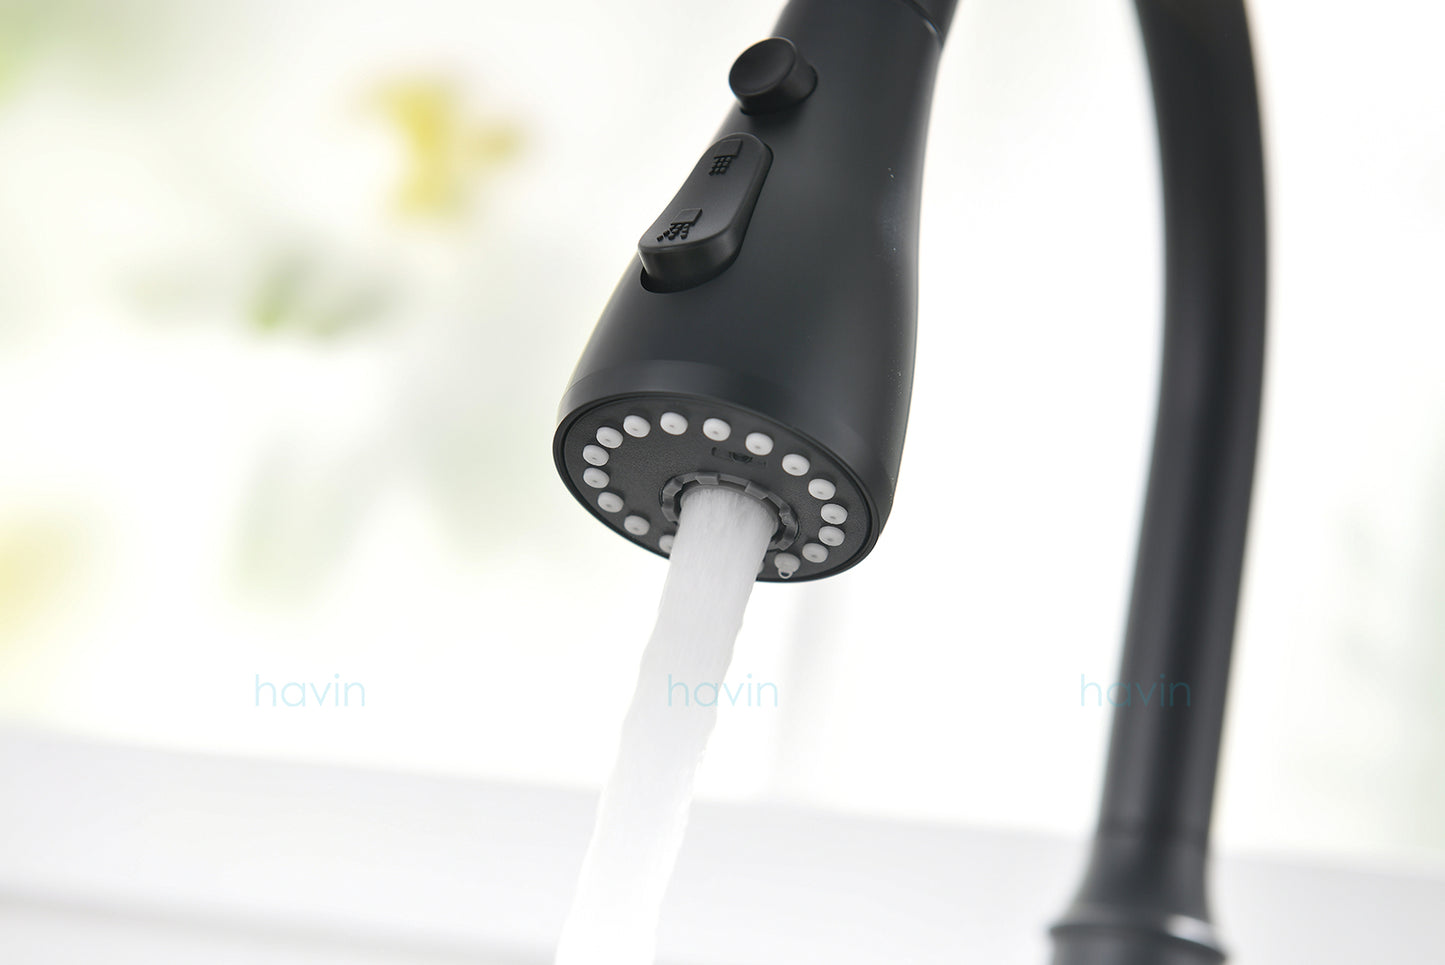 Havin Kitchen Faucet with Pull Down Sprayer Head,Kitchen Faucet Including 10" Deck Plated,(Matte Black)HV803